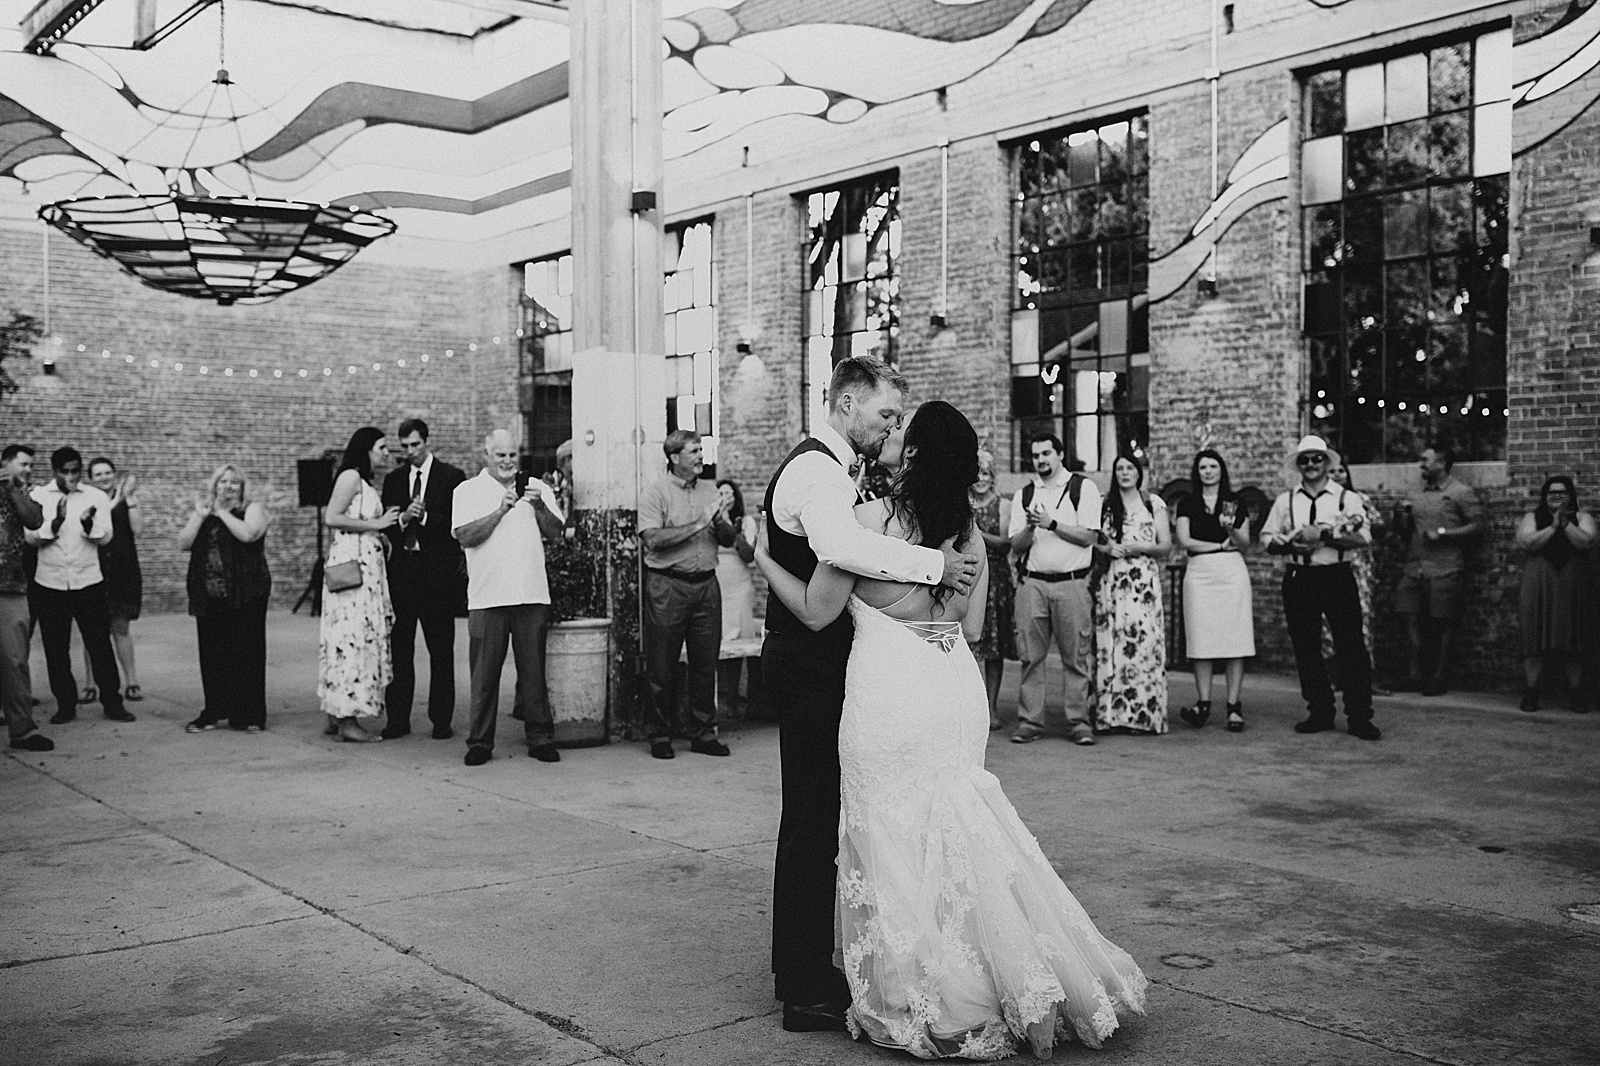 The reception photos at their wedding in the Soda District Courtyard in Abilene.